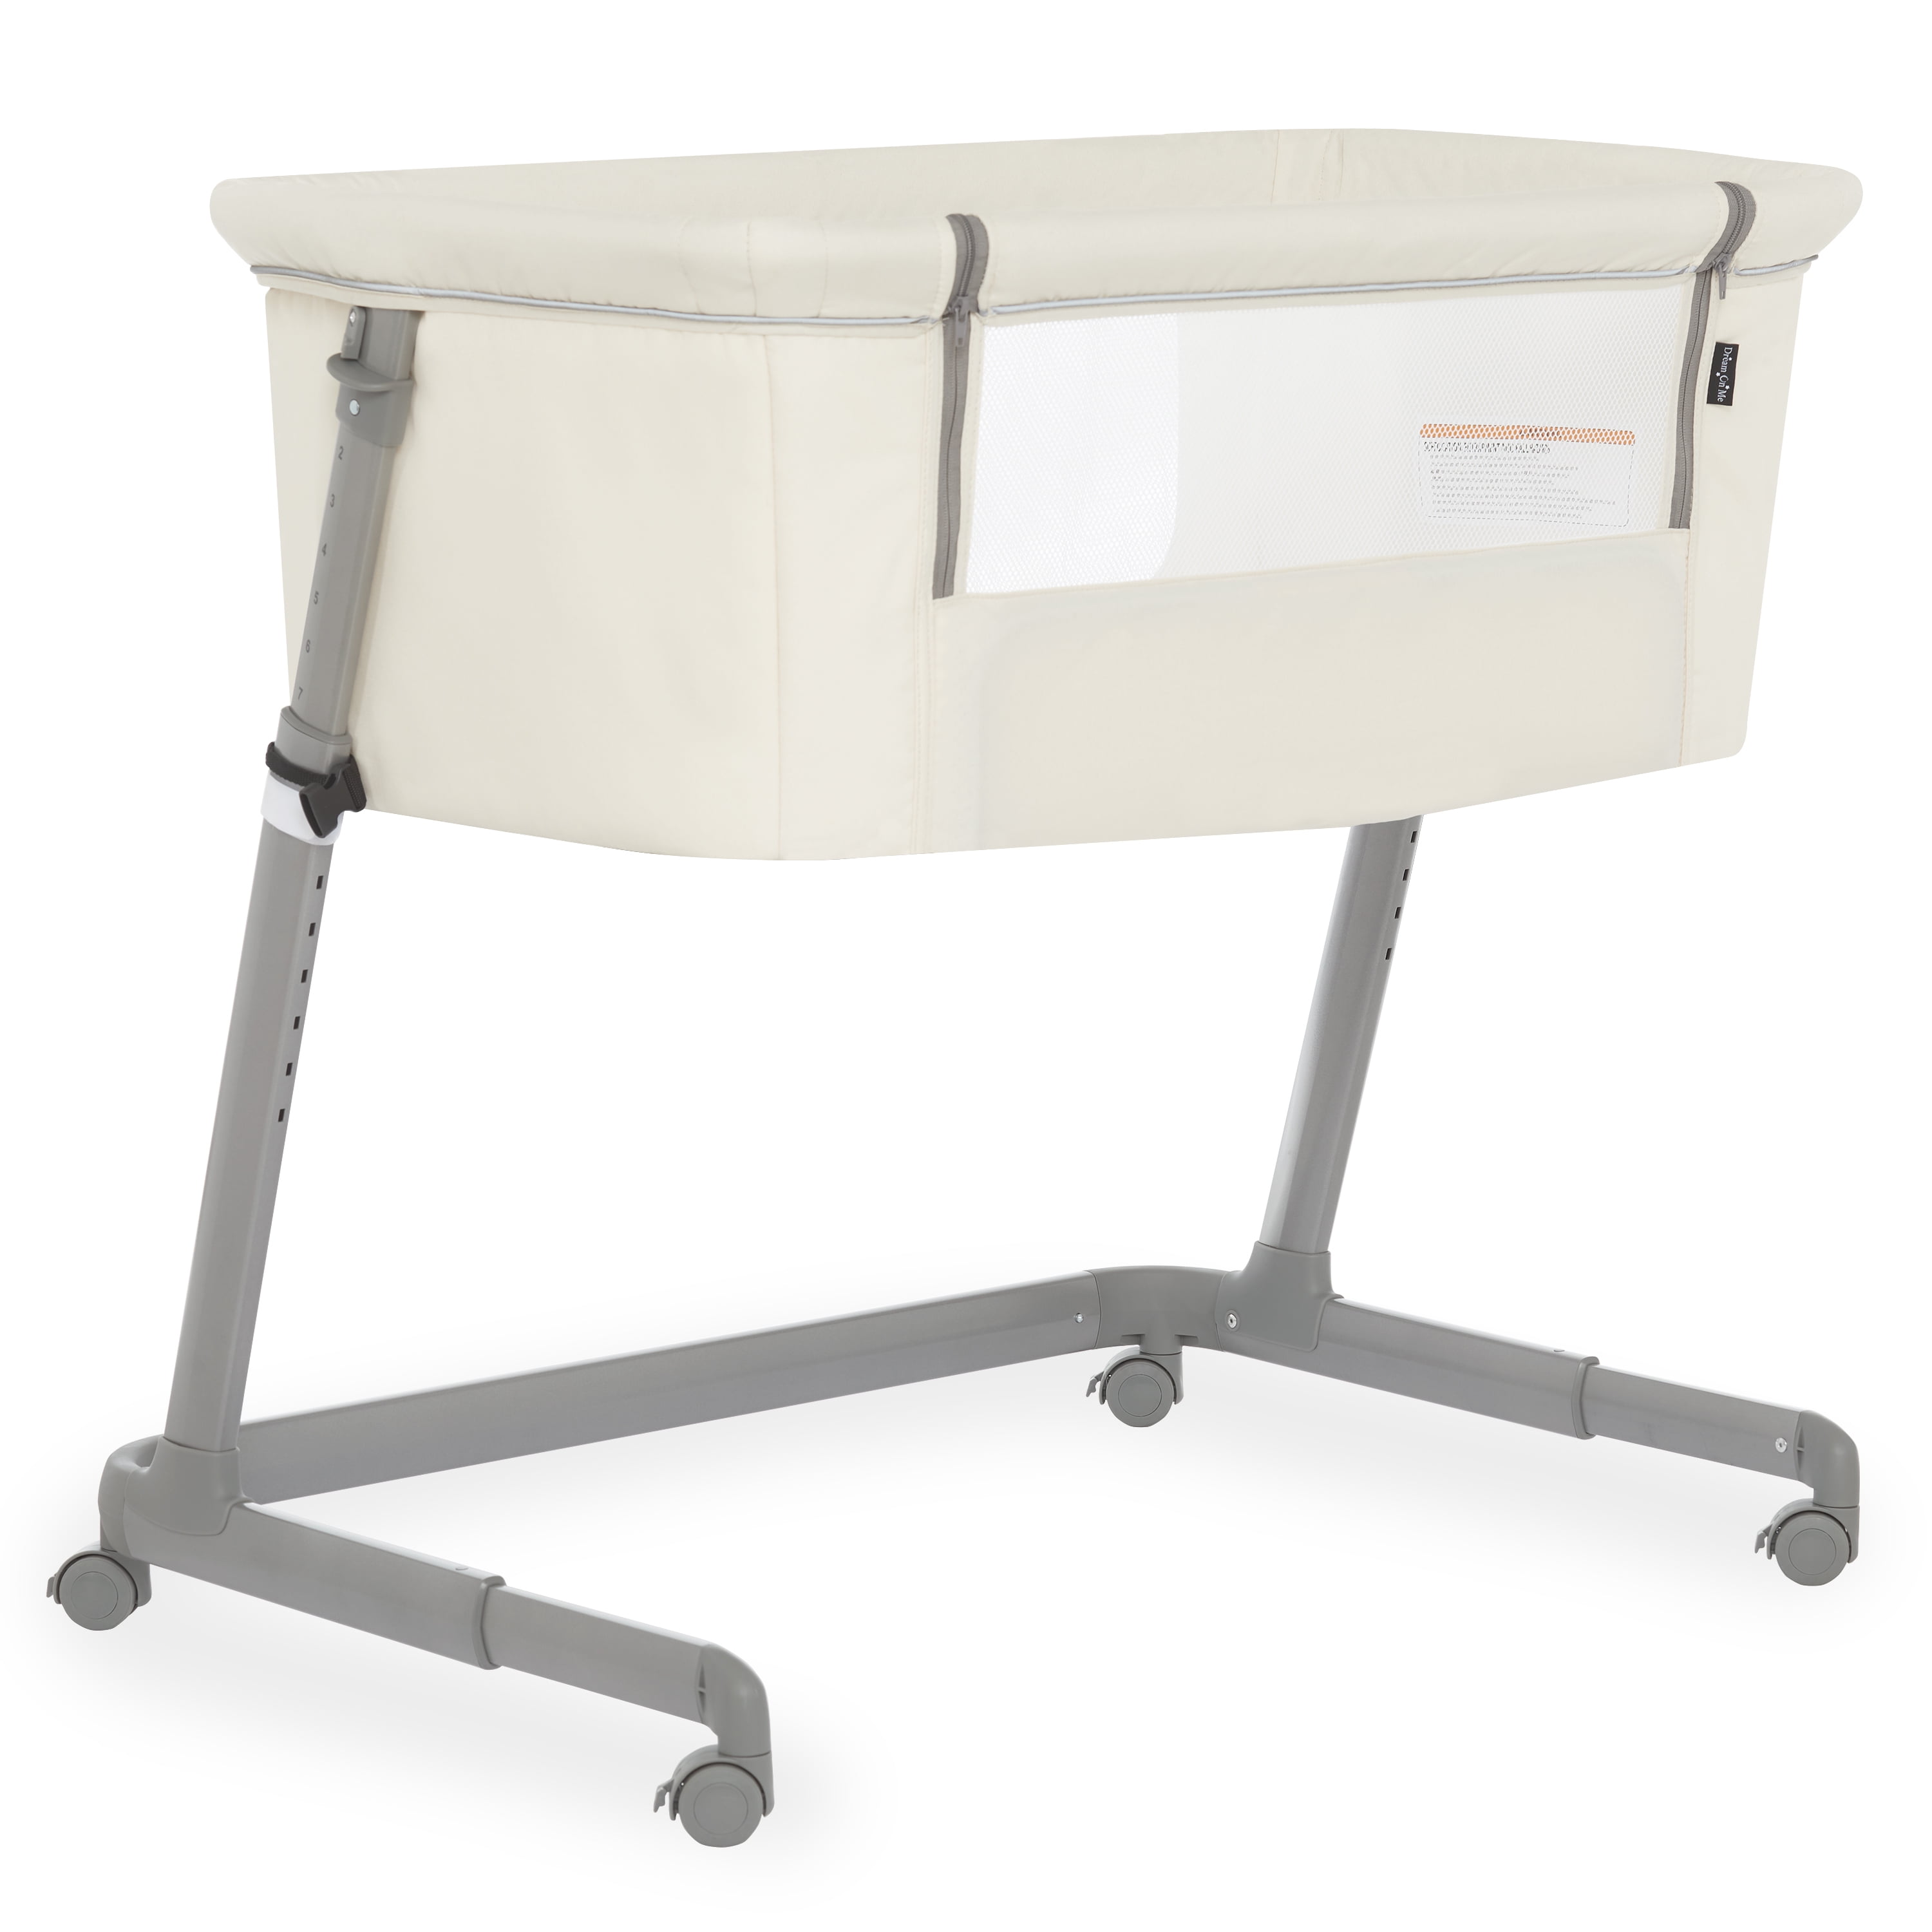 Dream On Me Seashell Bassinet & Bedside in Rose, Lightweight Easy Folding and Height Adjustable Baby Bassinet, Mattress Pad Included, JPMA Certified - Walmart.com